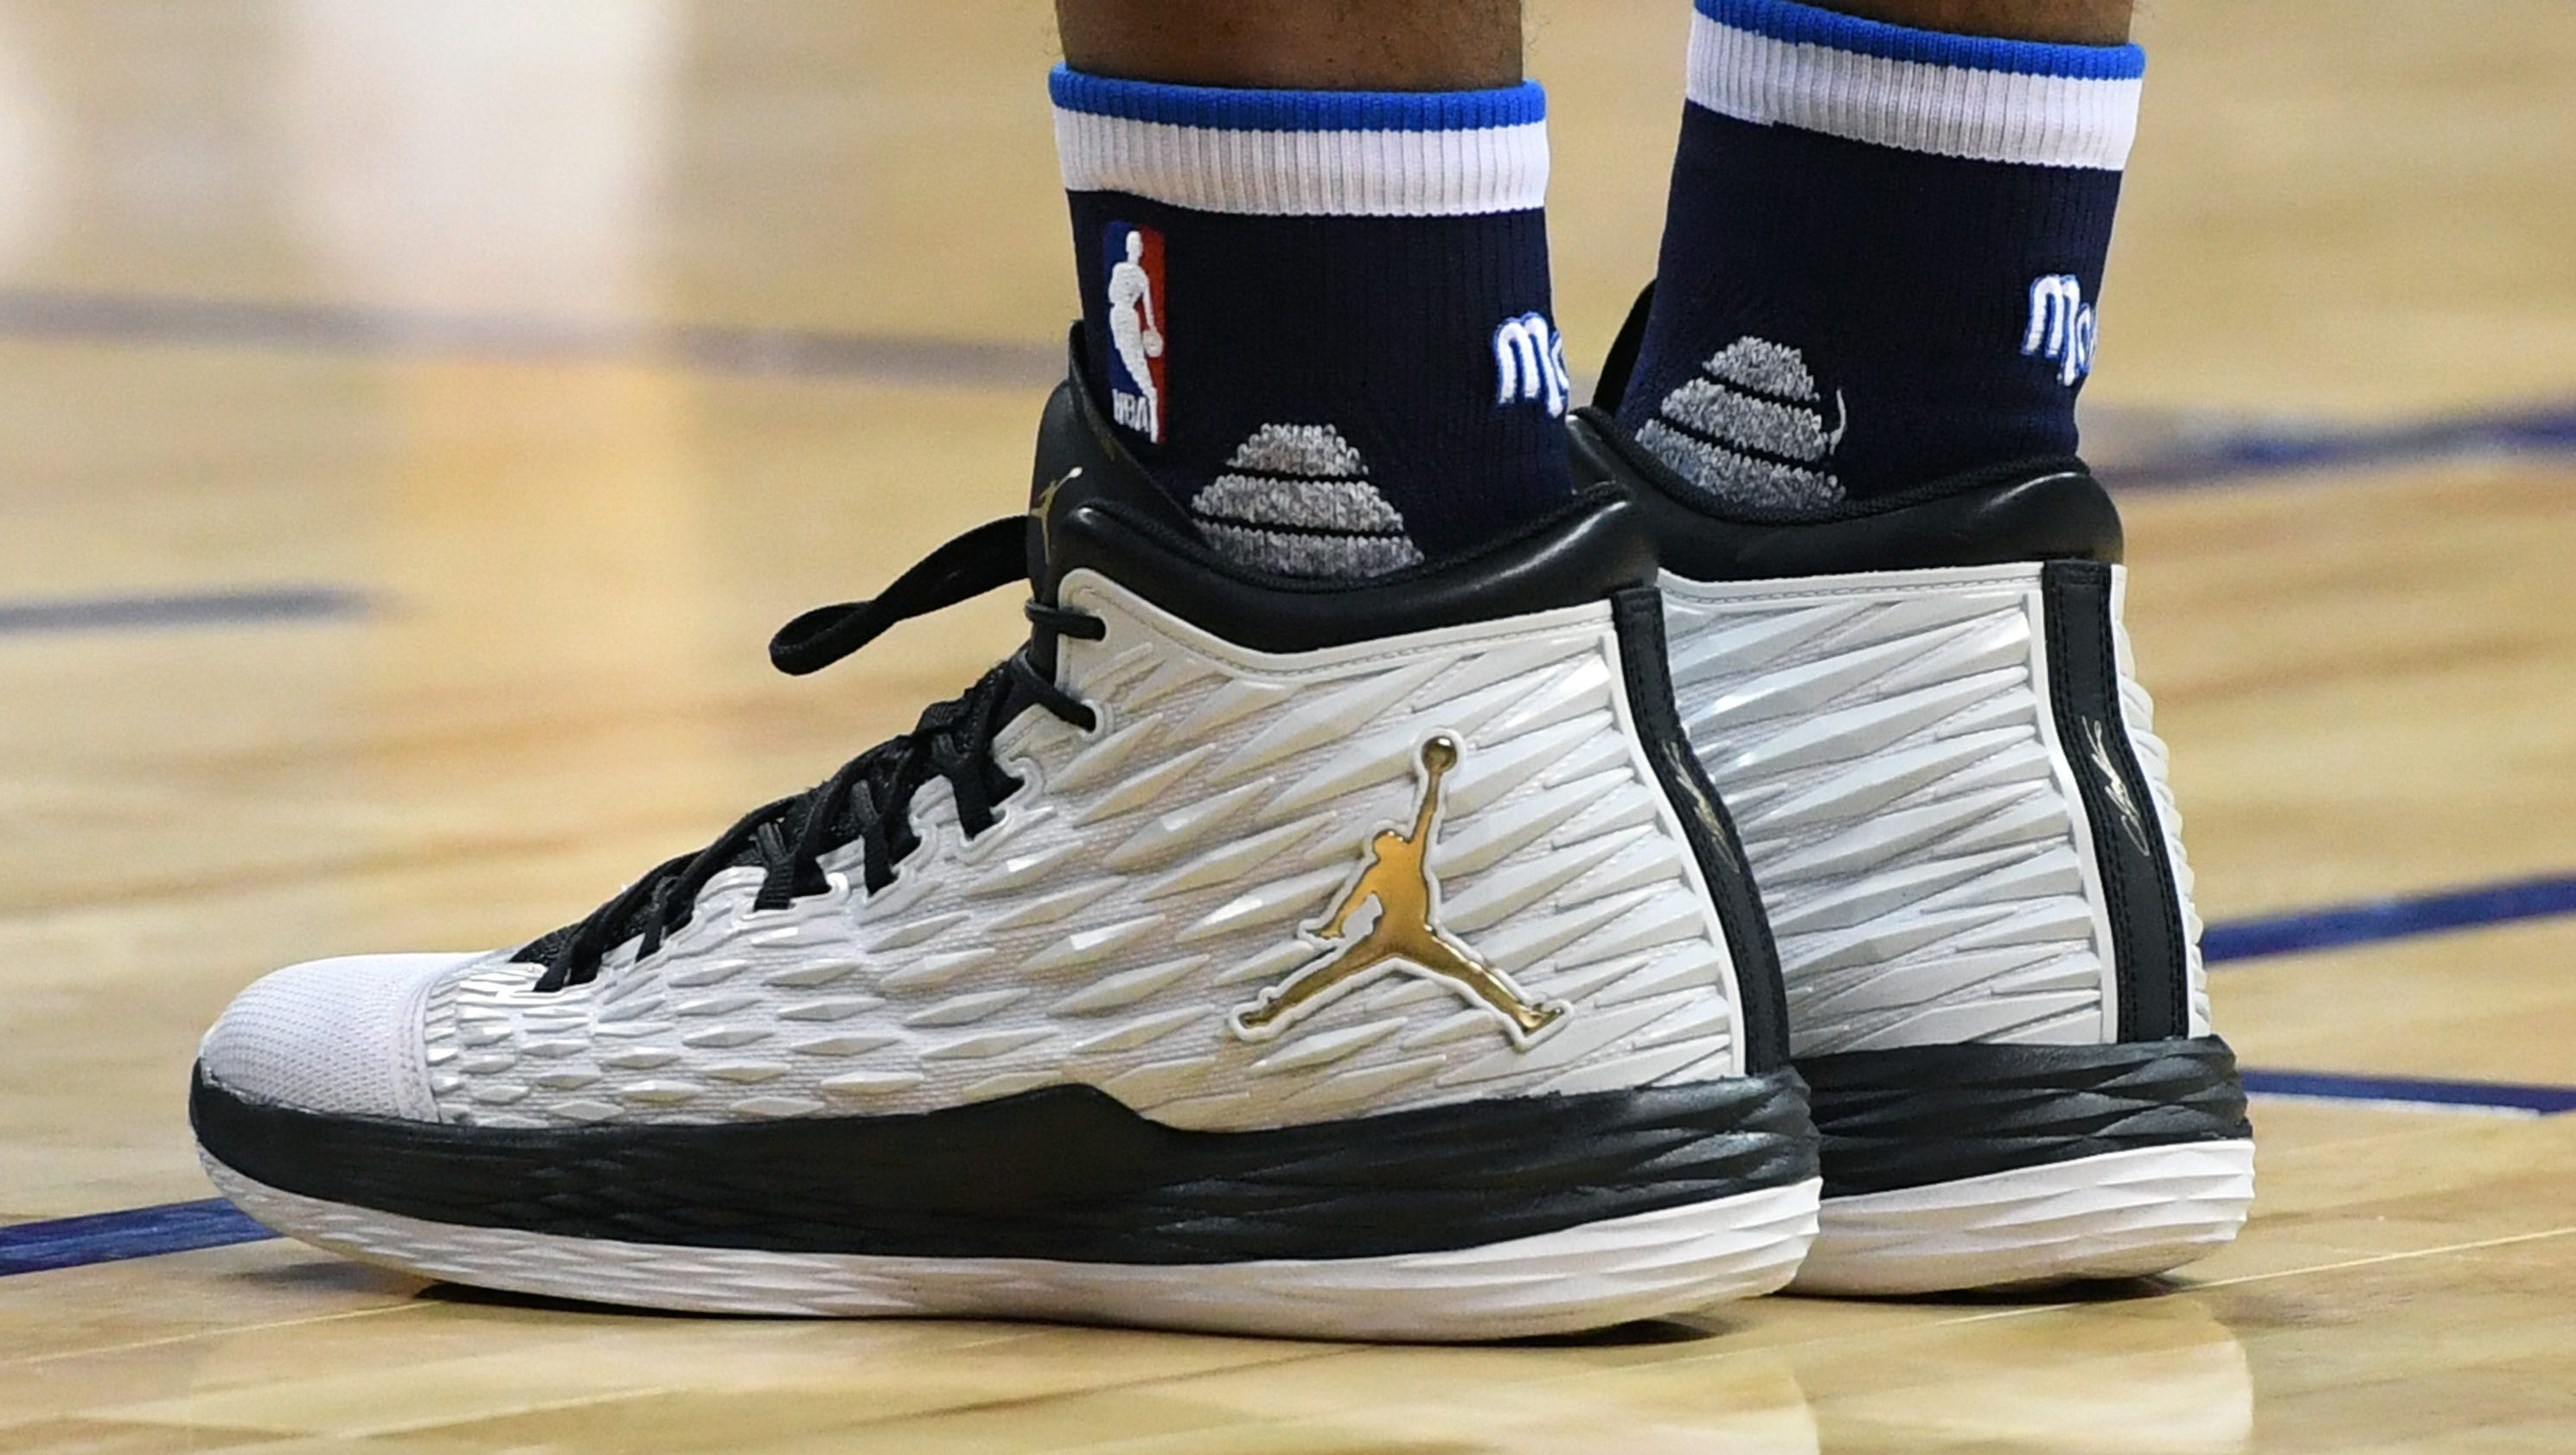 What are the most popular shoes worn by young NBA players?